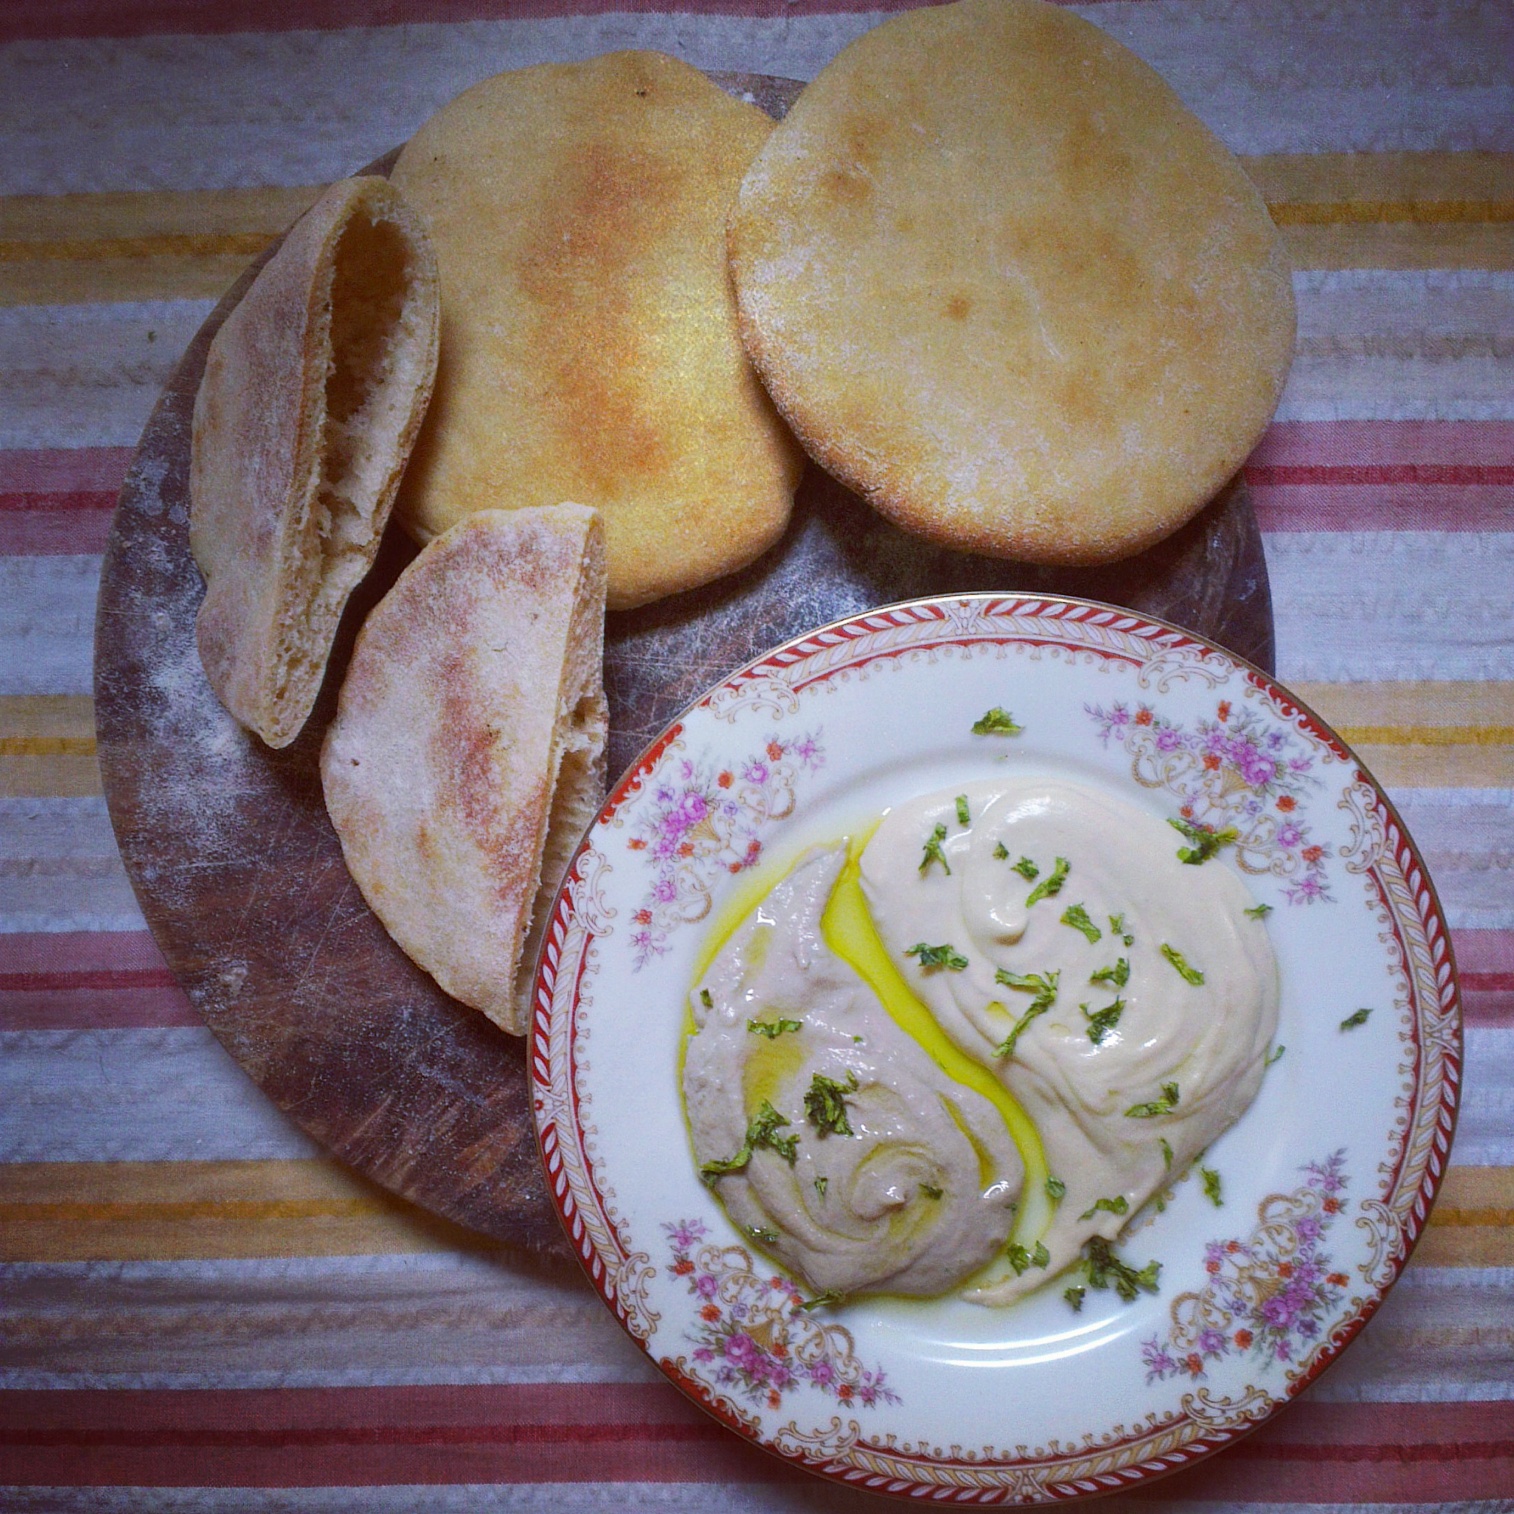 Making your own Pita bread (and Baba Ganoush)